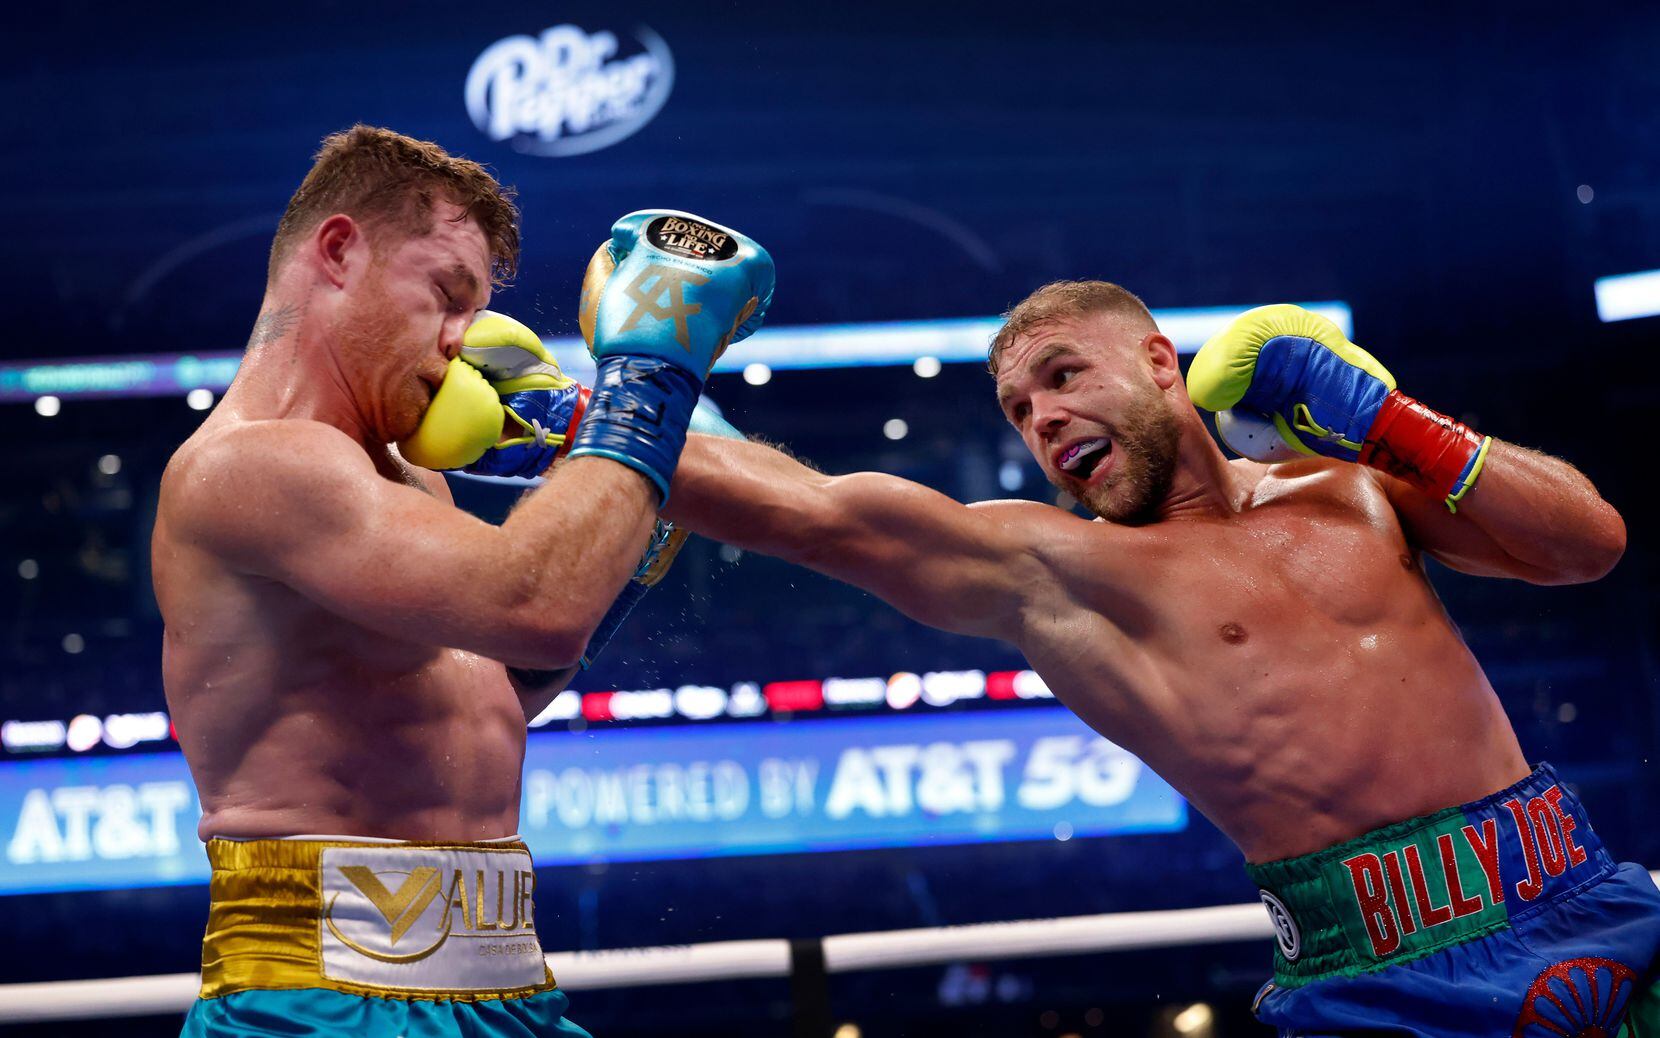 Billy Joe Saunders (right) got a clean shot to the face of Canelo Alvarez during their super...